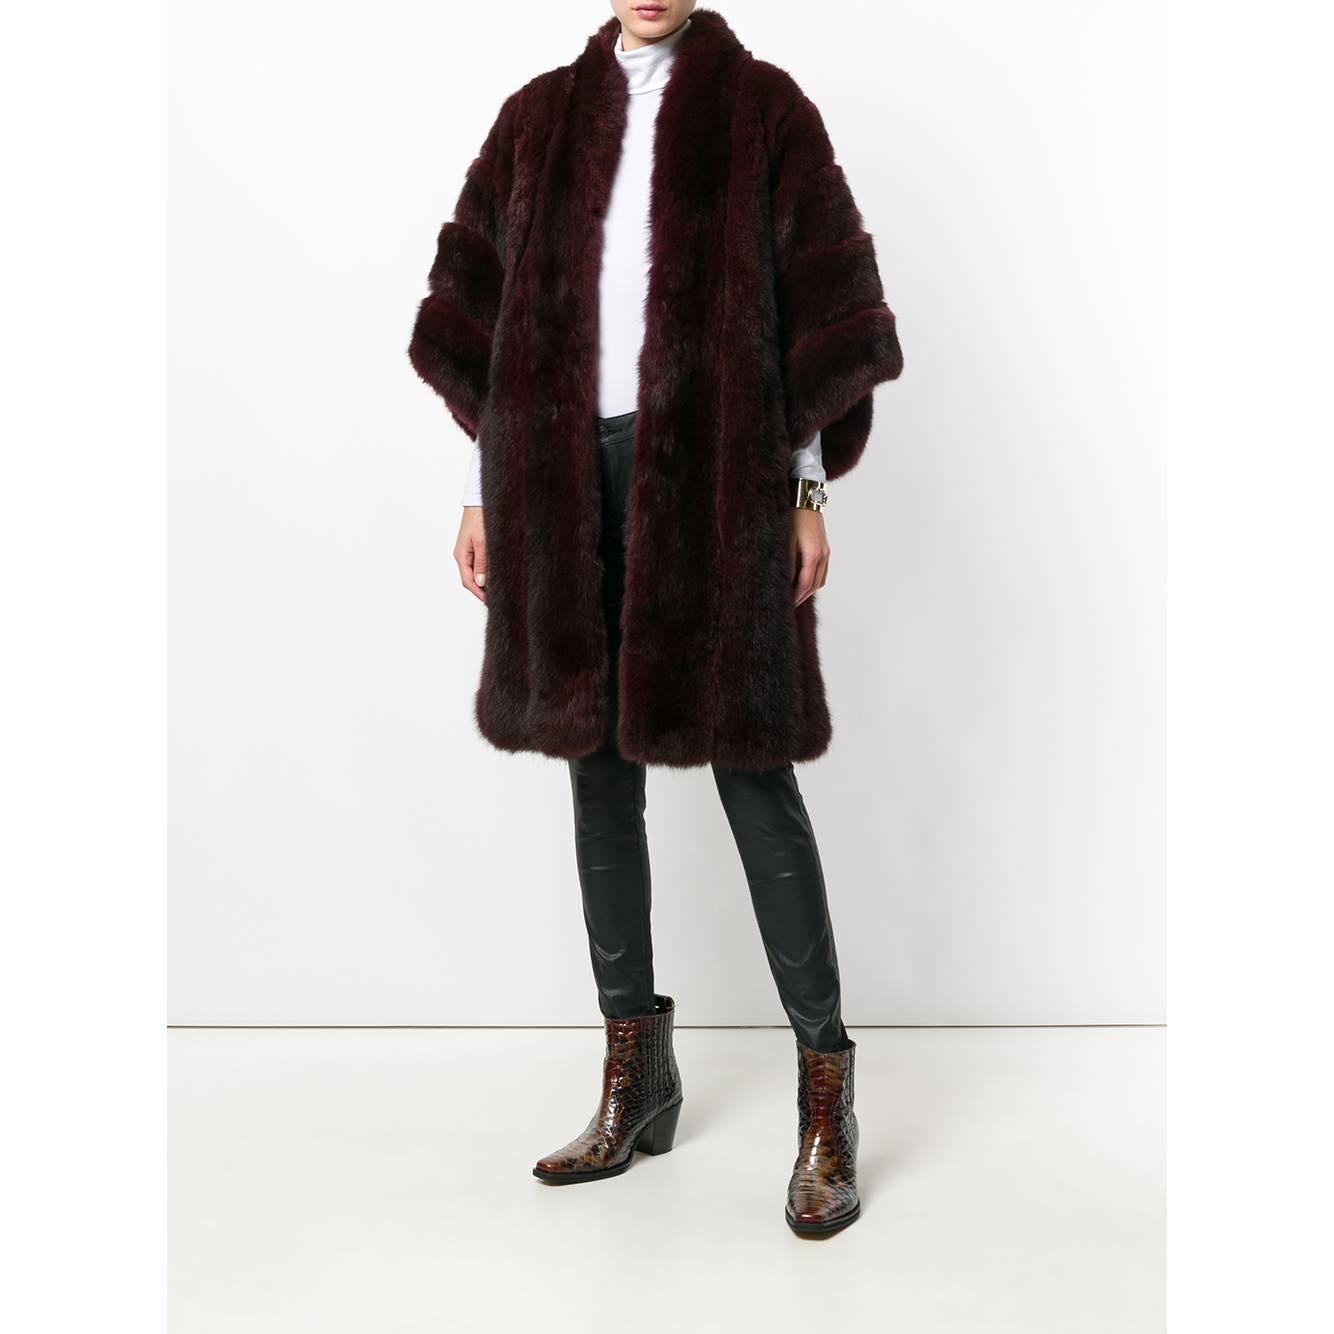 A.N.G.E.L.O. Vintage - ITALY

Christian Dior burgundy color pine marten fur coat. Model with V-neck, front closure with hook and wide sleeves.

Please note this item cannot be shipped outside the European Union.

Years: 80s

Made in France

Size: 44